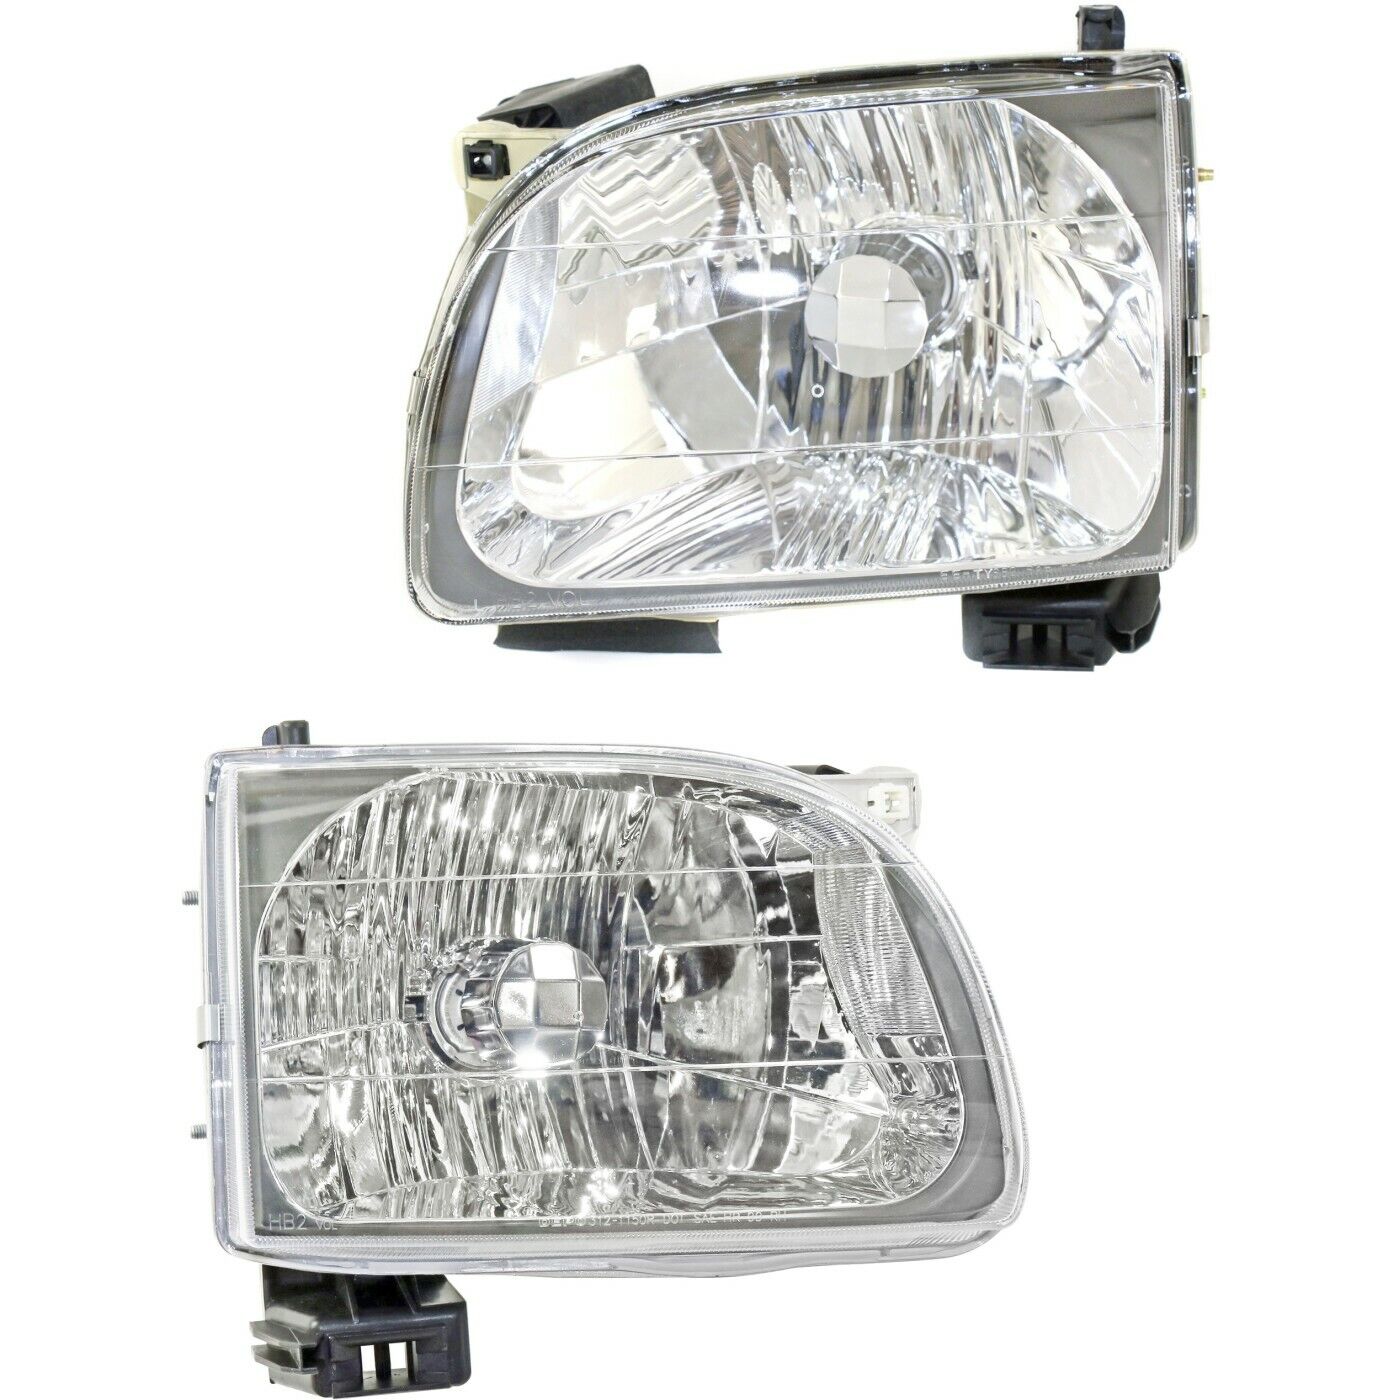 Headlight Set For 2001-2004 Toyota Tacoma Left and Right With Bulb 2Pc